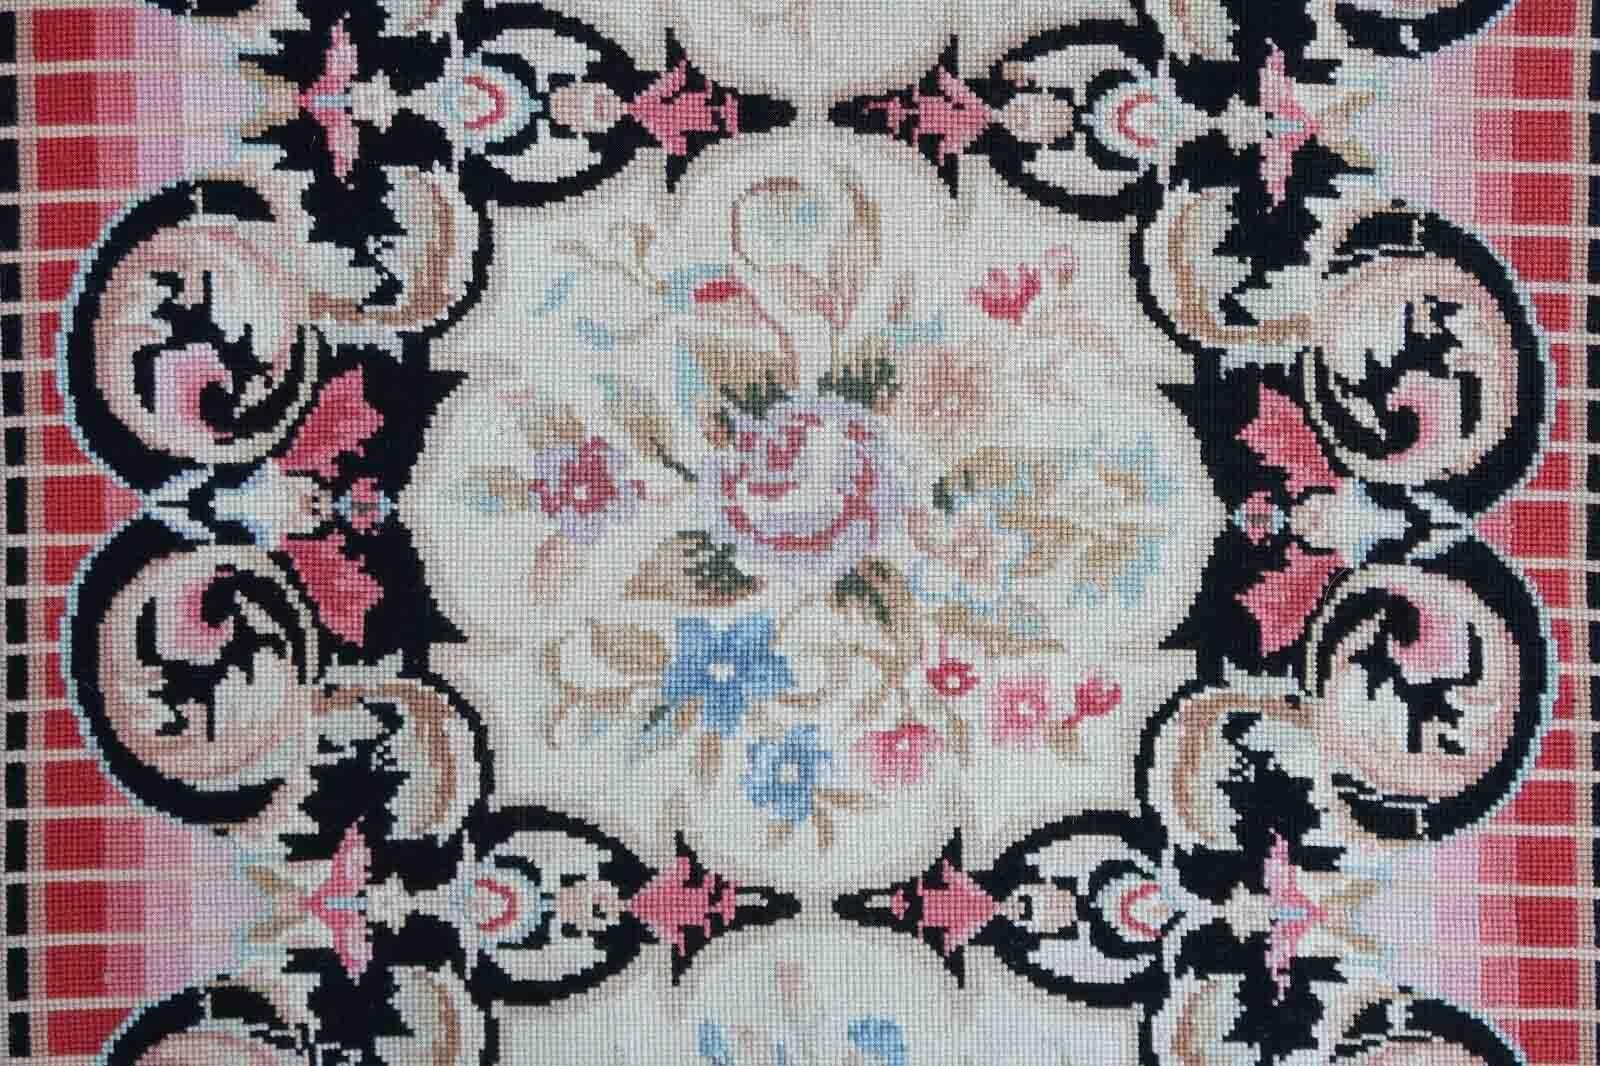 Handmade vintage English needlepoint in floral design. This needlepoint is from the end of 20th century in original good condition.

-condition: original good,

-circa: 1970s,

-size: 2.8' x 4.7' (88cm x 145cm),

-material: wool,

-country of